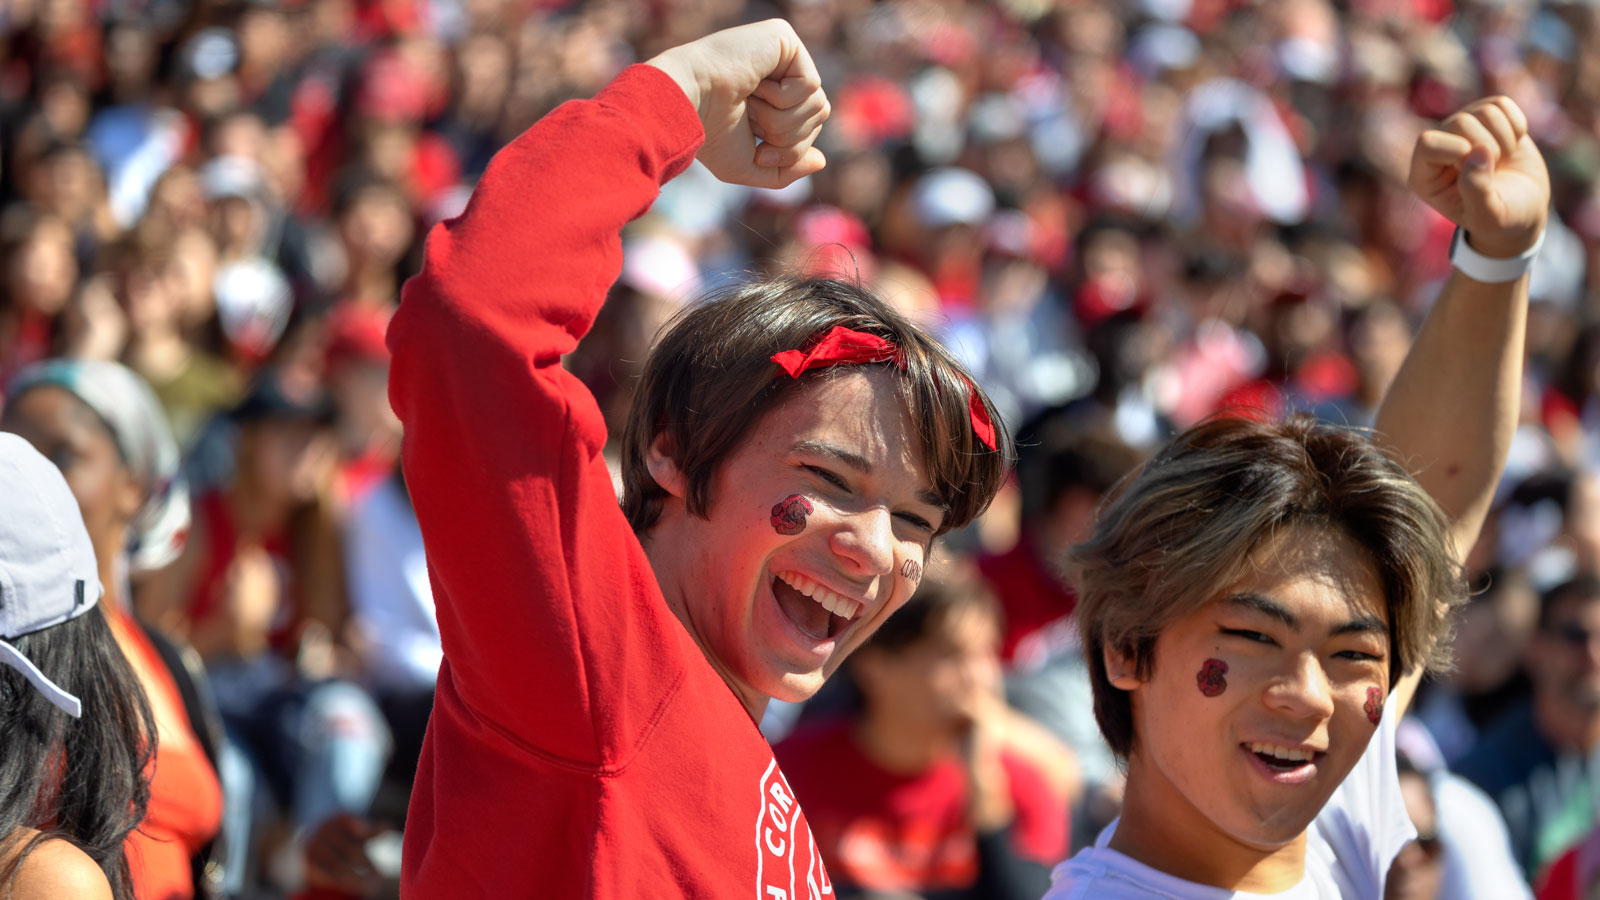 Big Red spirit was seen throughout the crowd at the Homecoming football game against Yale